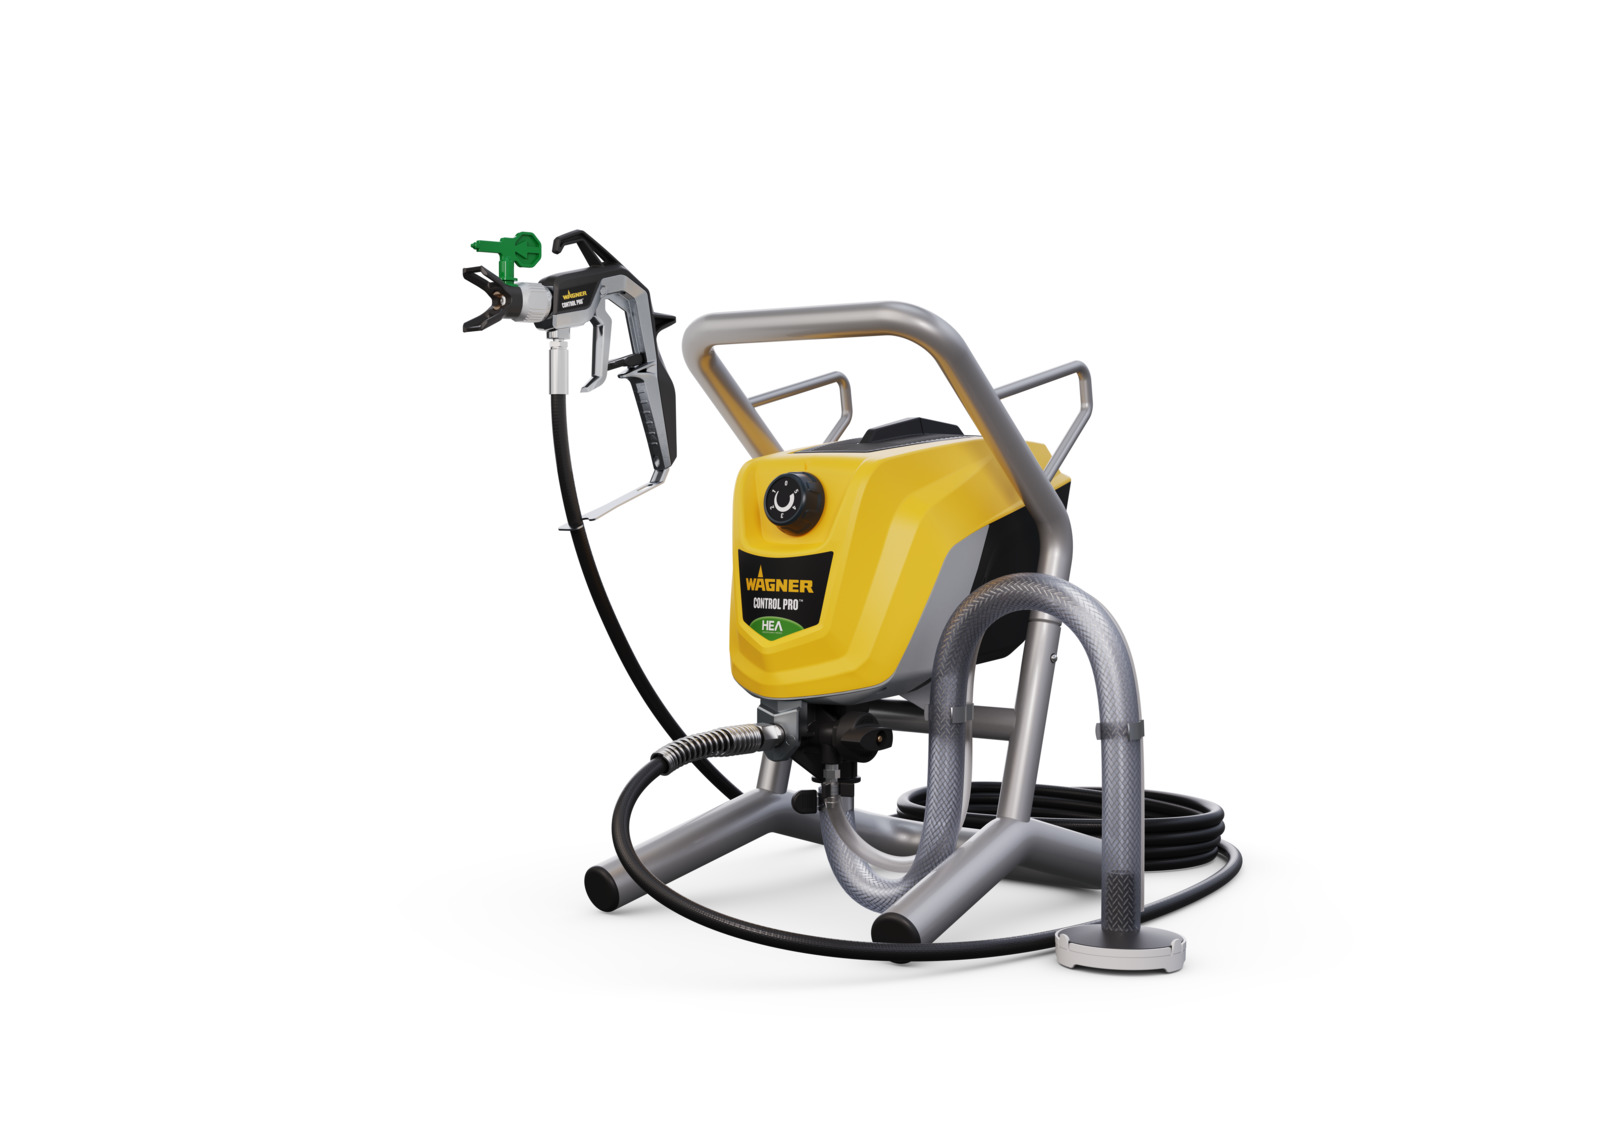 Wagner Control Pro 250M Skid Airless Sprayer 230V 2371054 from